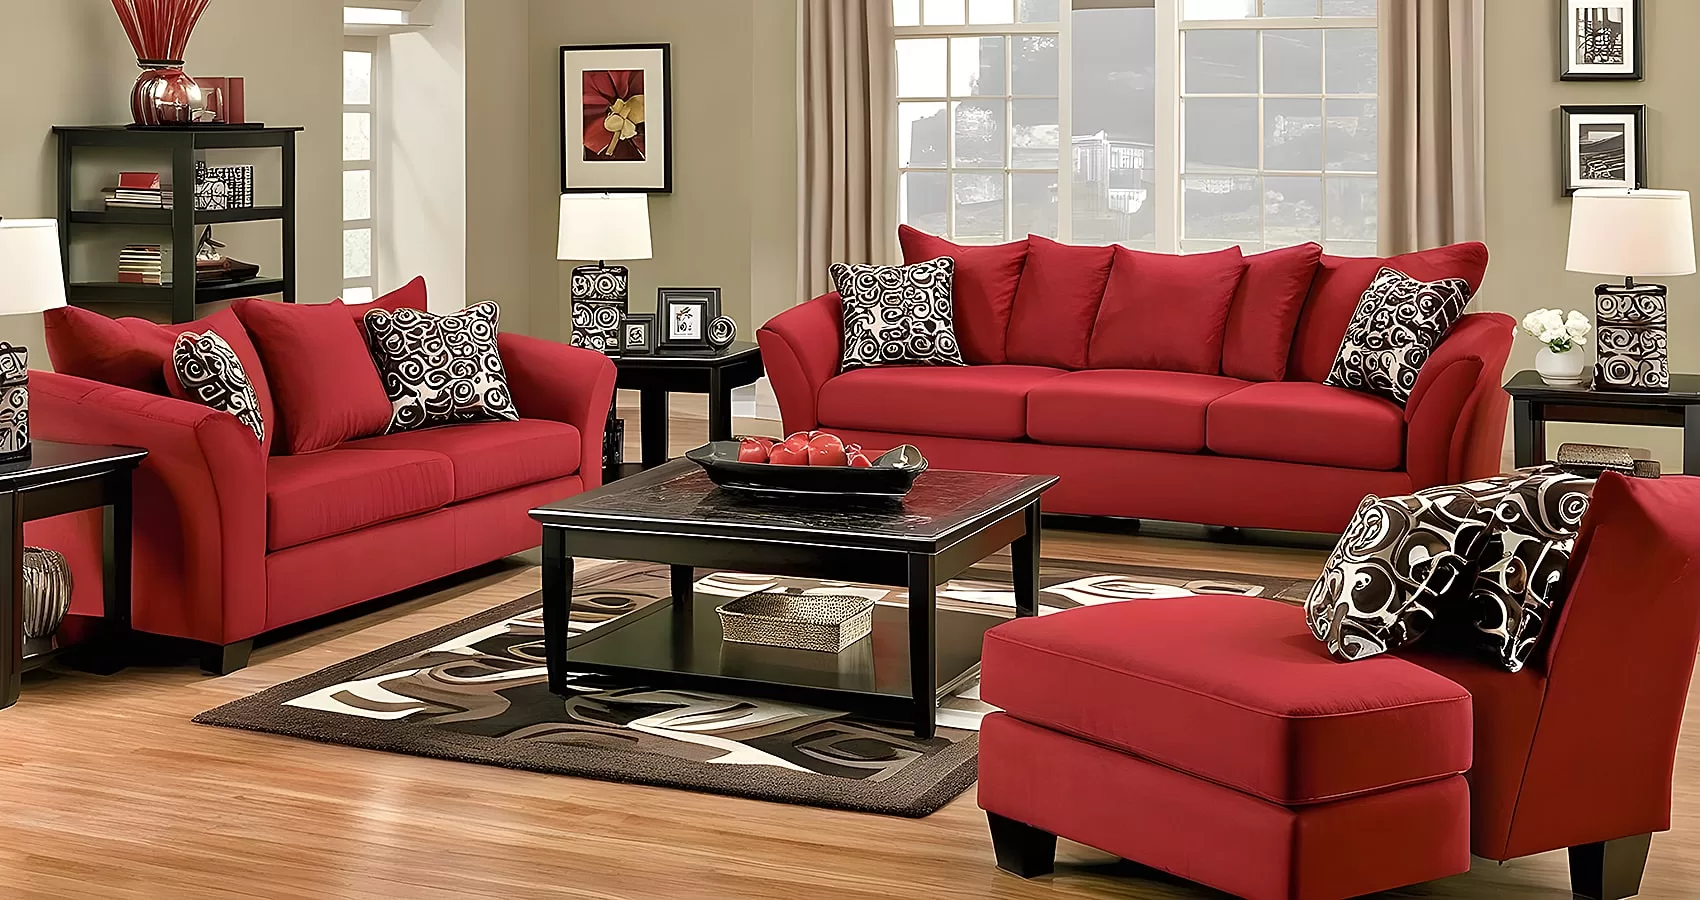 Red Couch Living Room Ideas Copy Min Jpg.webp